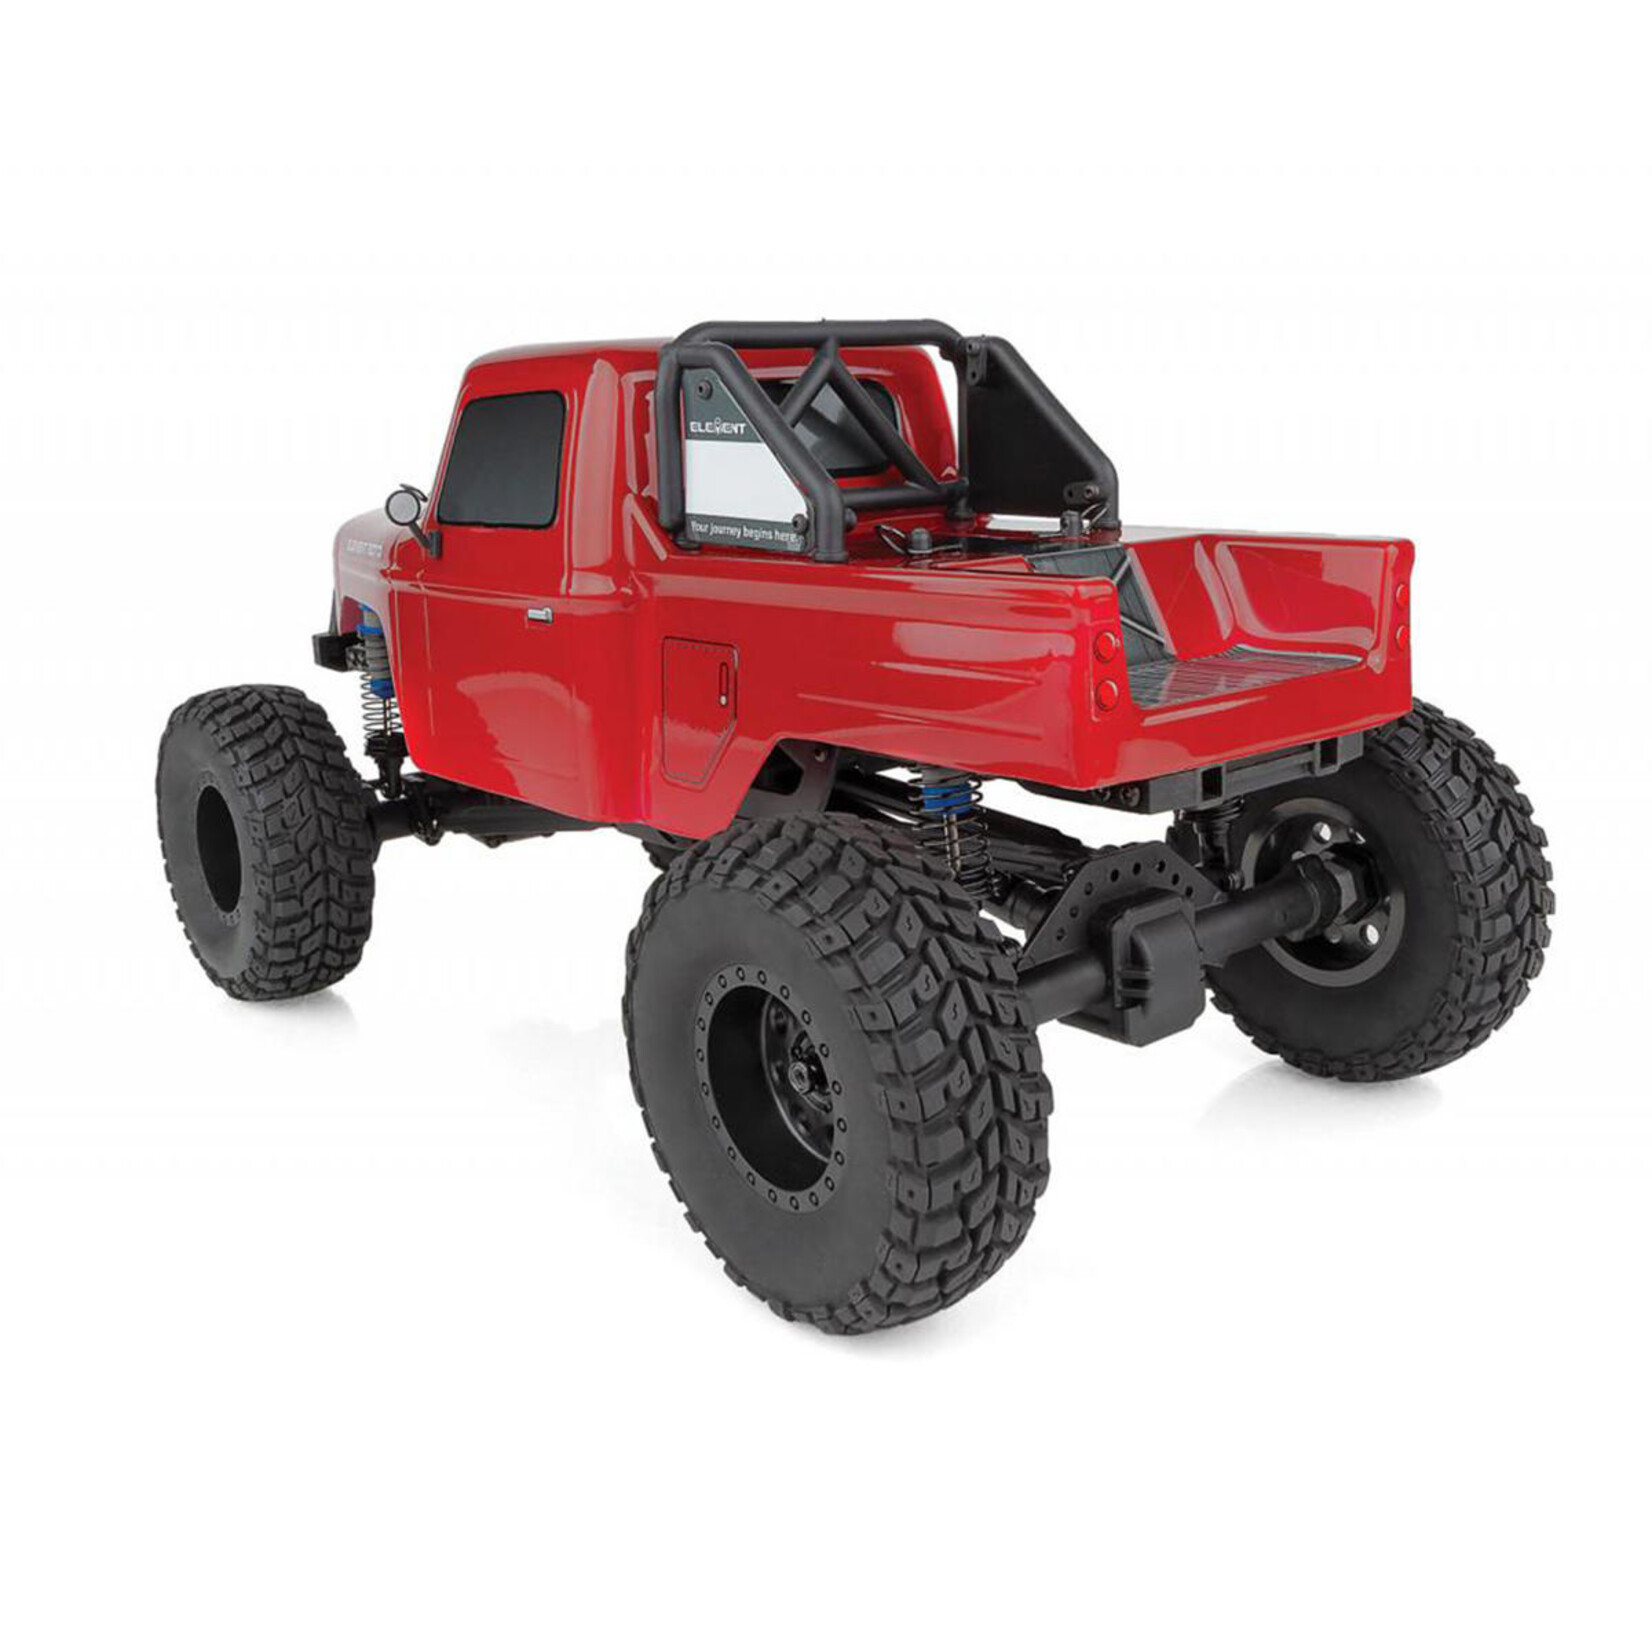 Element RC Element RC Enduro12 Ecto 1/12 4WD RTR Scale Mini Trail Truck w/2.4GHz Radio, Battery & Charger #40010C